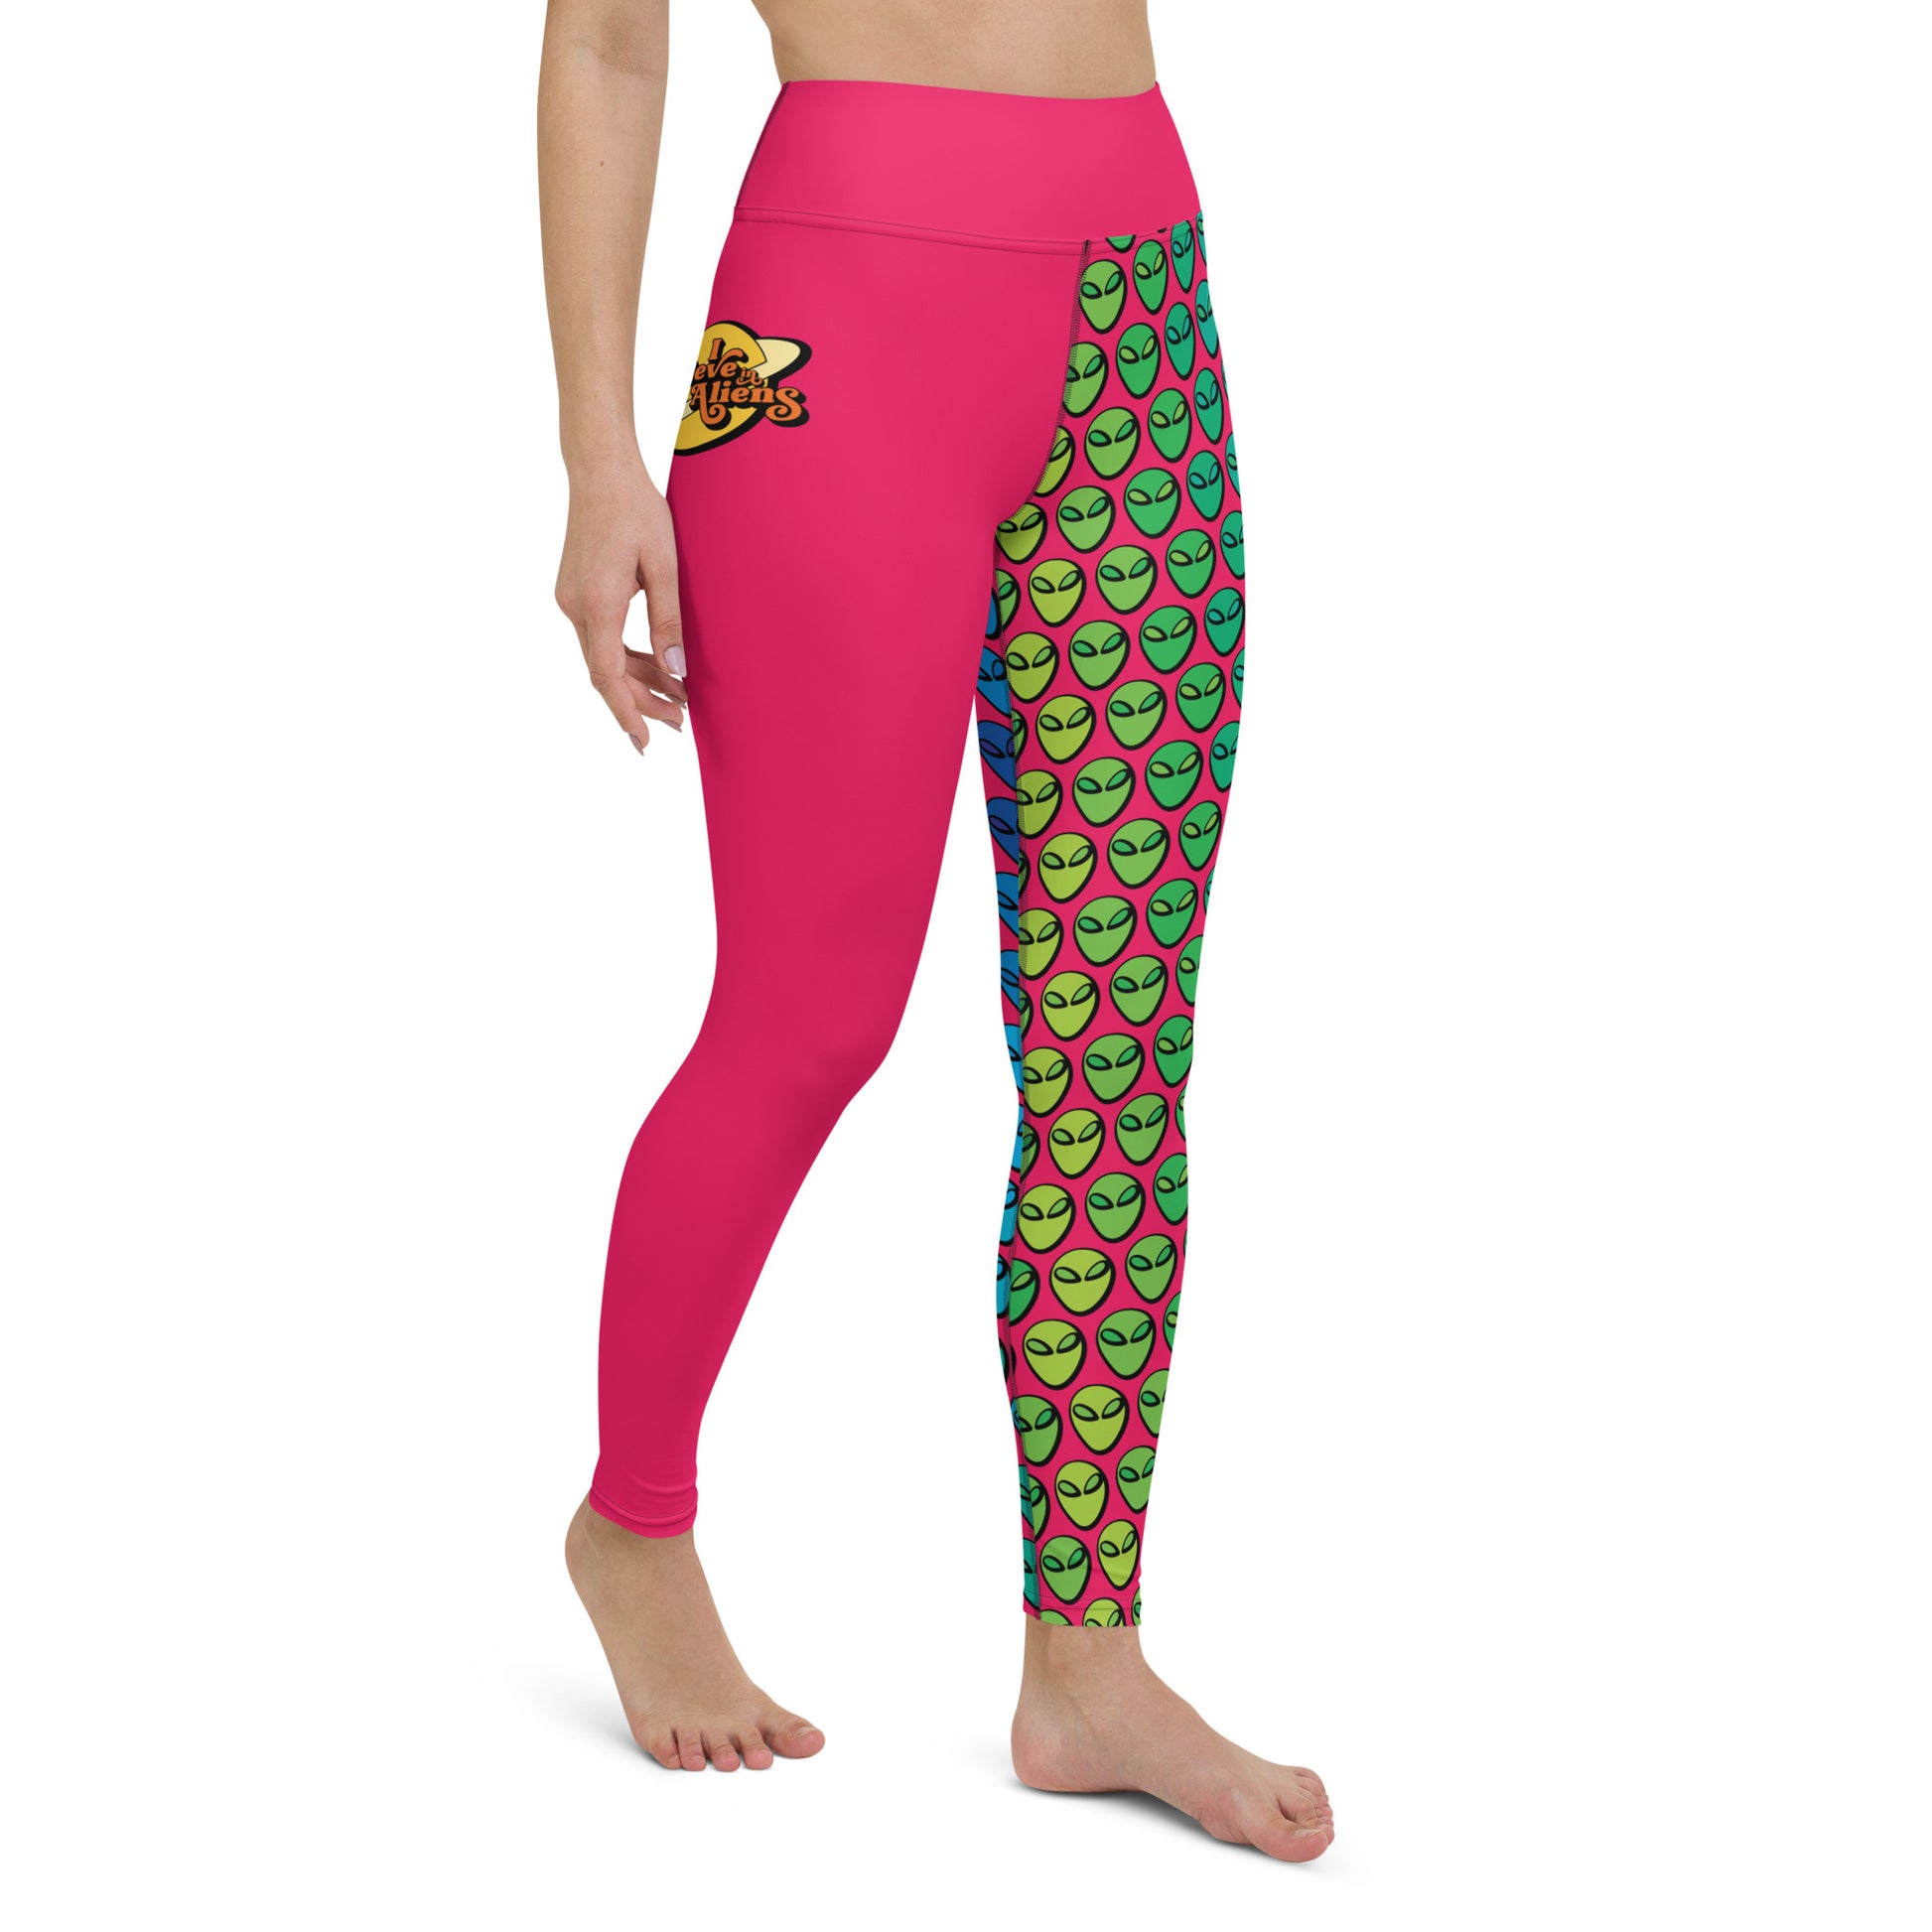 #WEIRDO | Awesome leggings for female weirdos who believe in Aliens! Check out this and more Alien stuff in our online giftstore for weirdos!